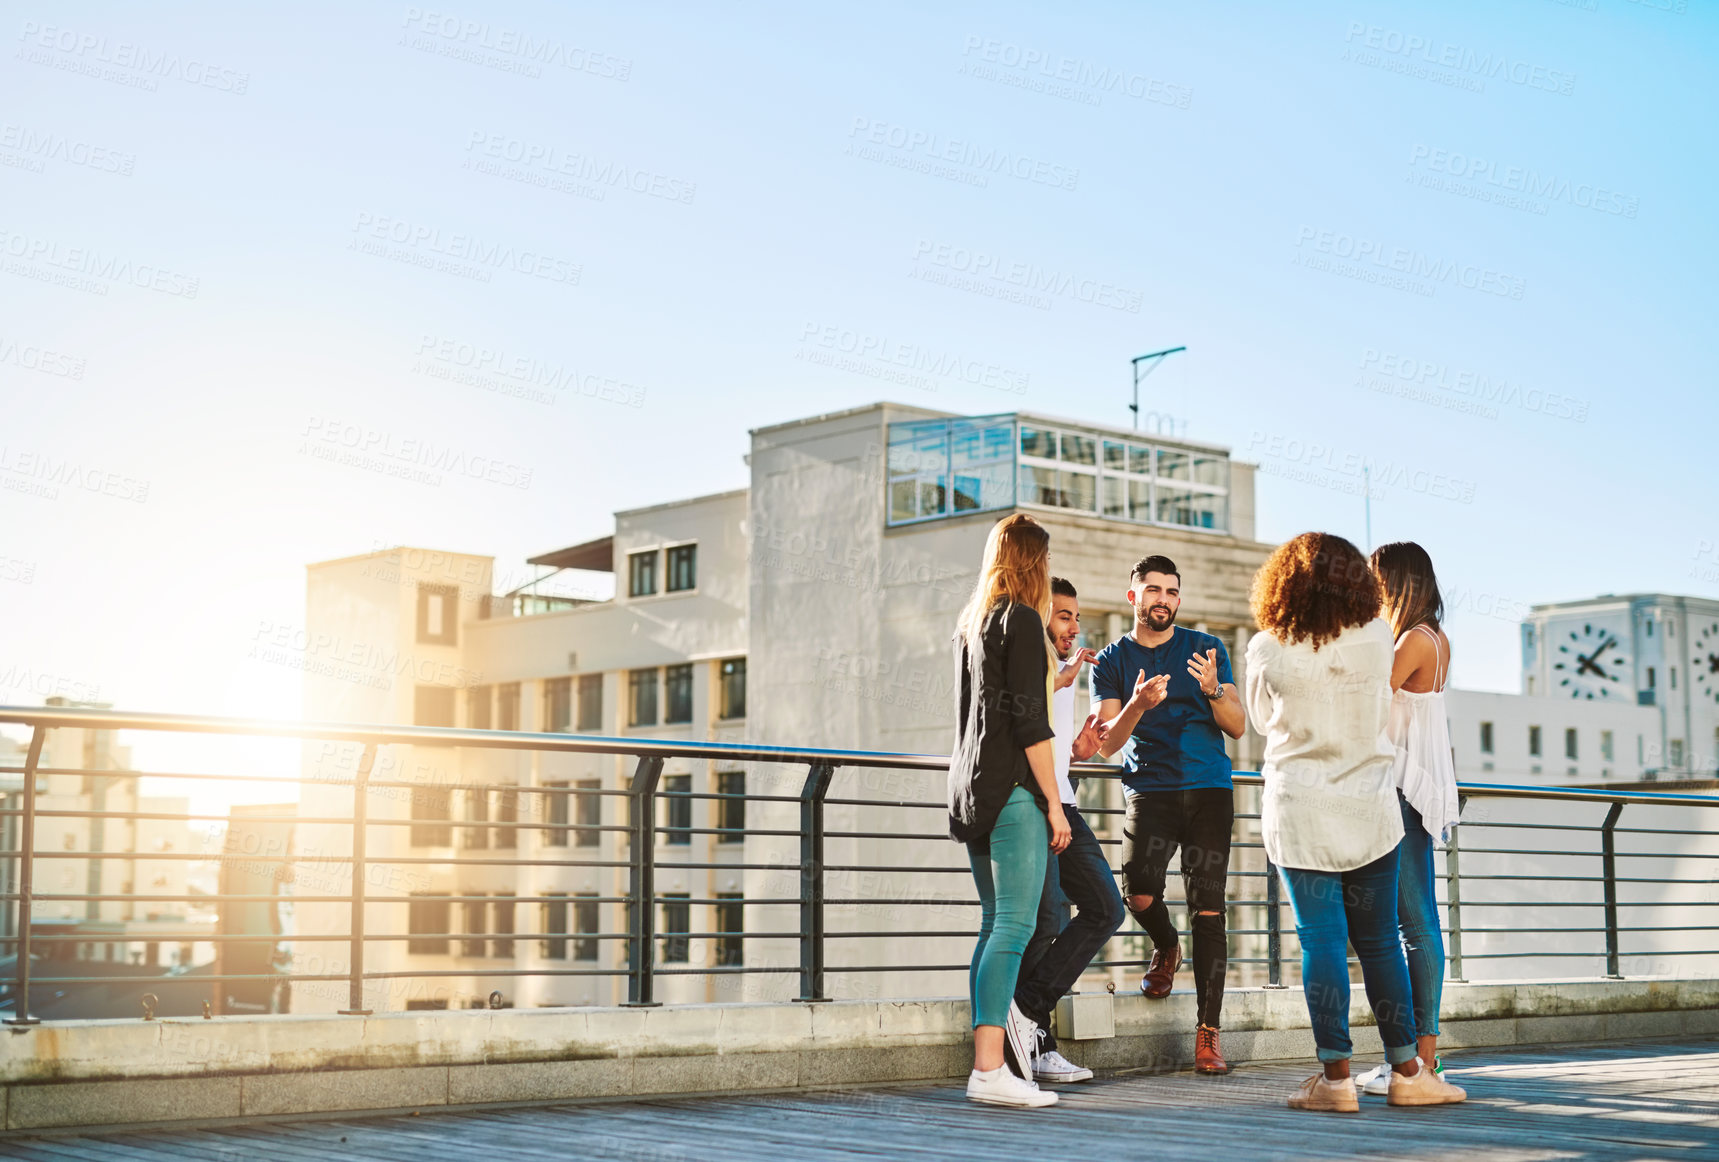 Buy stock photo Shot of young friends spending the day on a rooftop outside